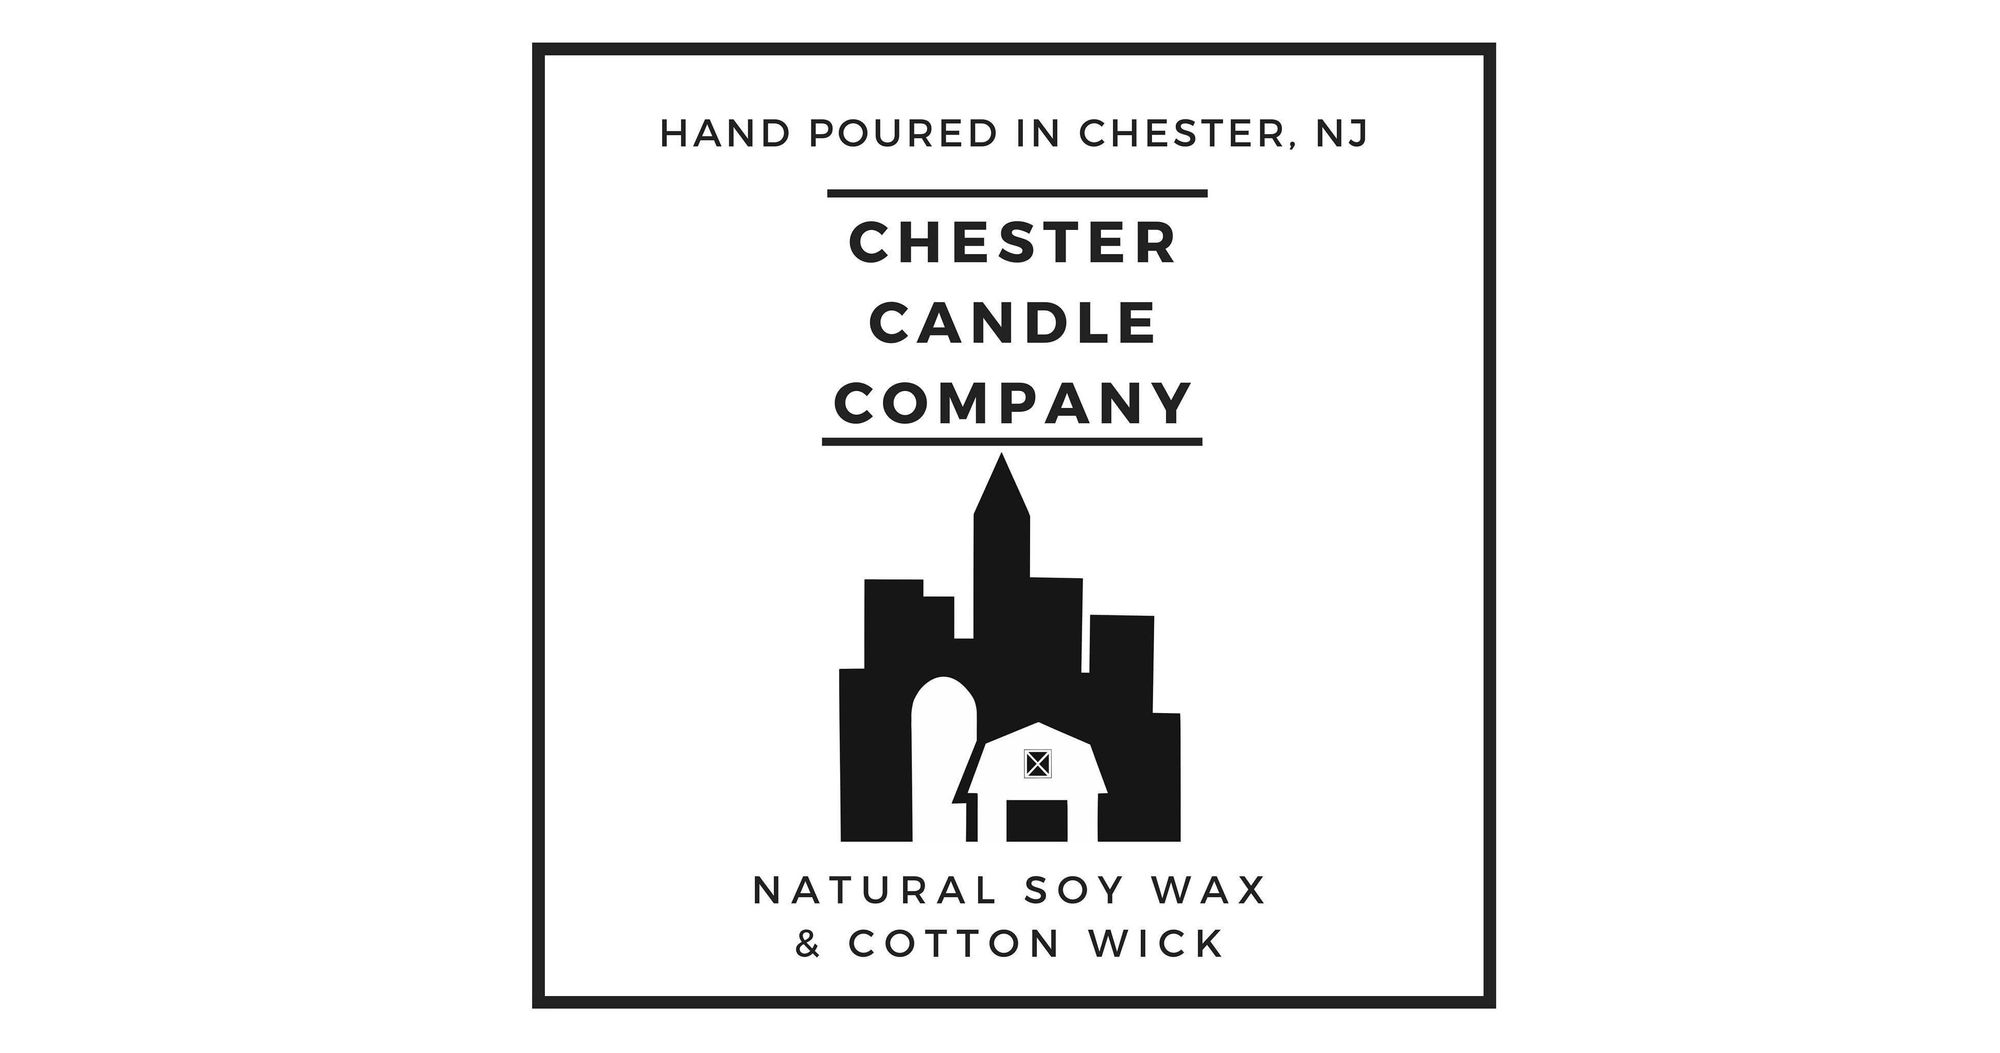 Hand-poured Clean-burning Candles - Chester Candle Company